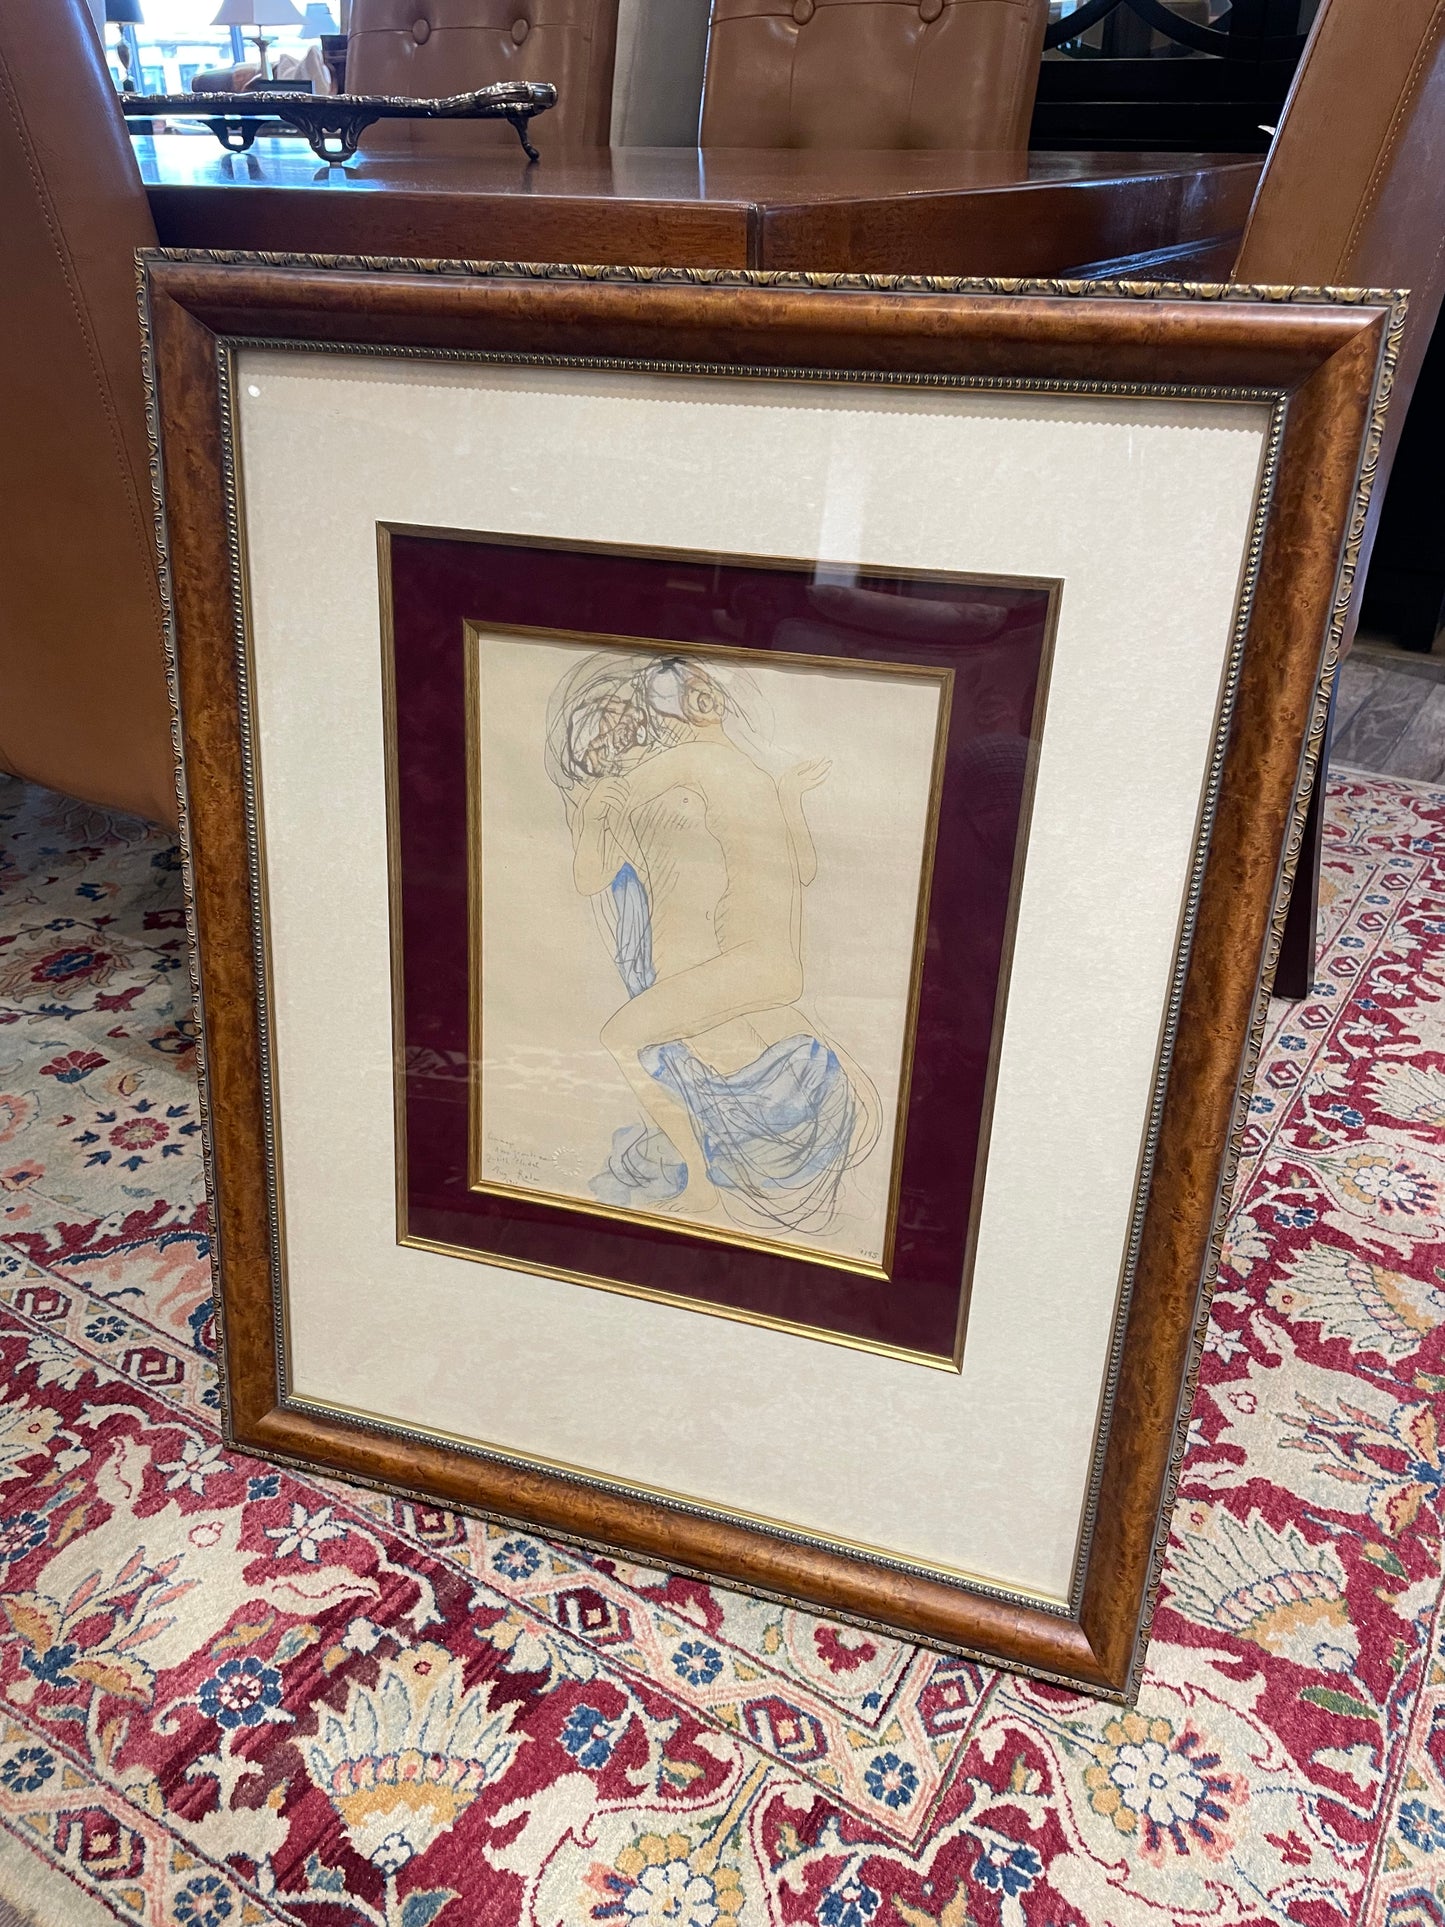 Auguste Rodin (French, 1840-1917) Framed Nude Sketch on Paper Lithograph